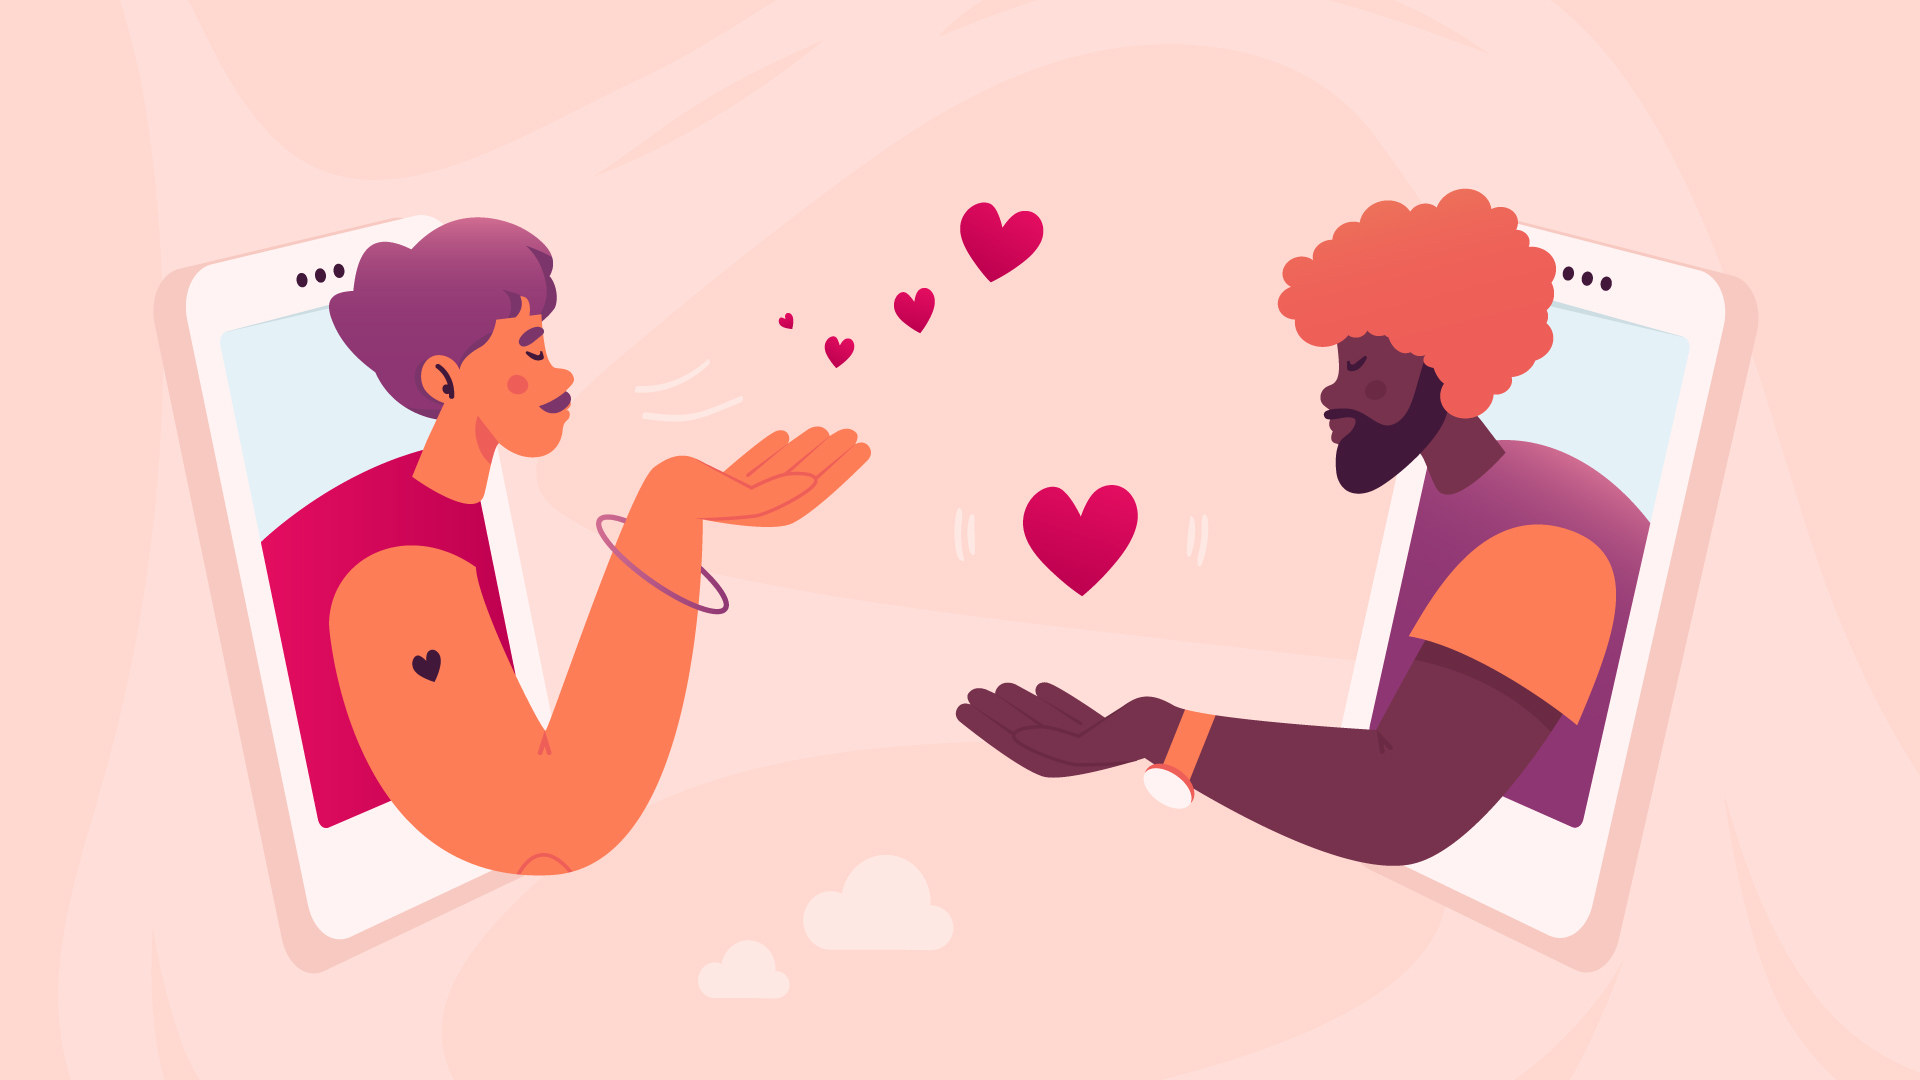 Purple-haired woman and orange-haired man coming out of facing phone screens and sending love hearts at each other.